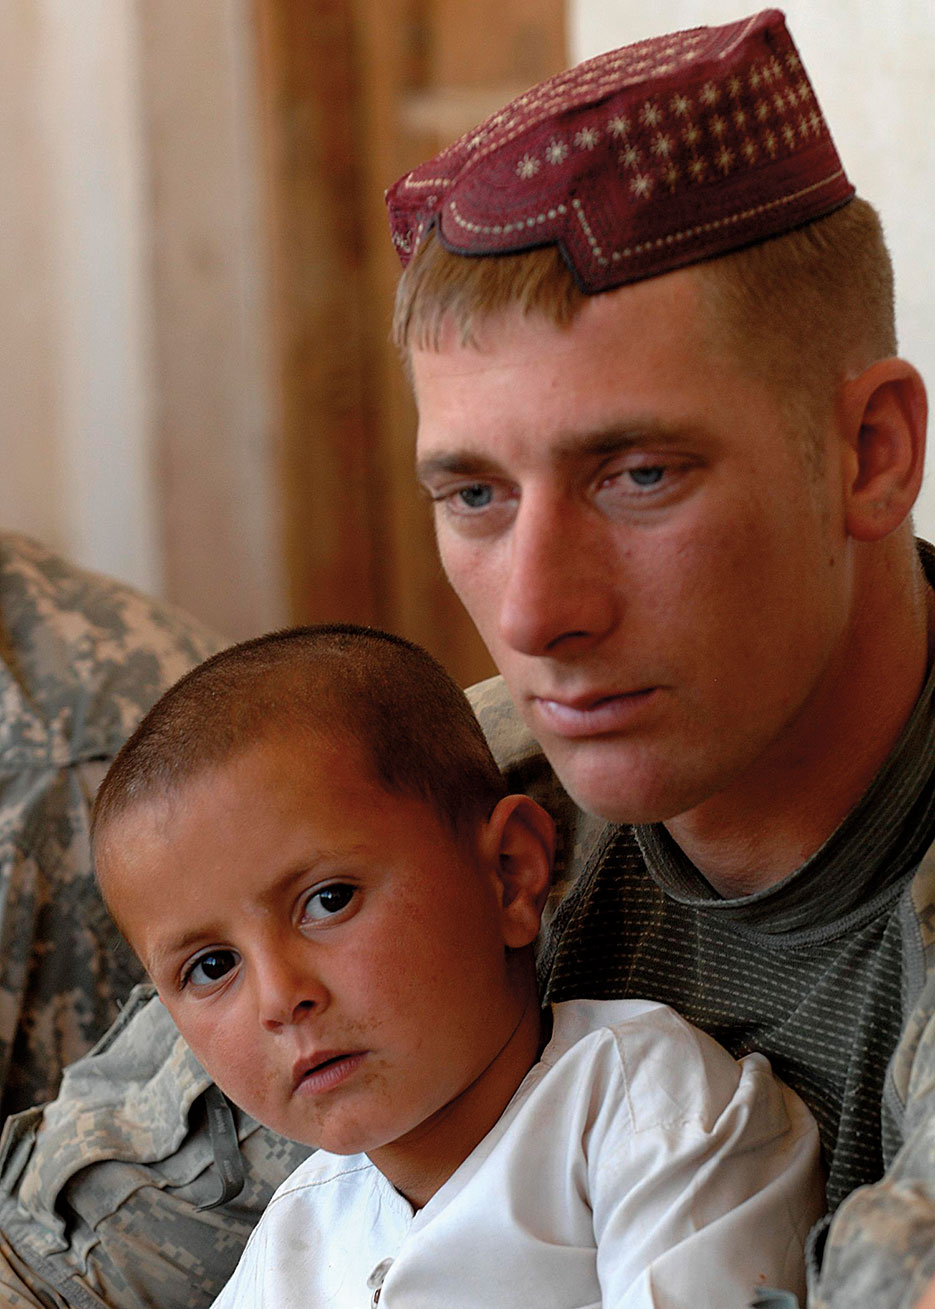 Soldier holds Afghan child and wears Kandahari hat to show solidarity during key leader meeting in Koshab Village near Kandahar Air Field, Afghanistan (U.S. Army/Stephen Schester)